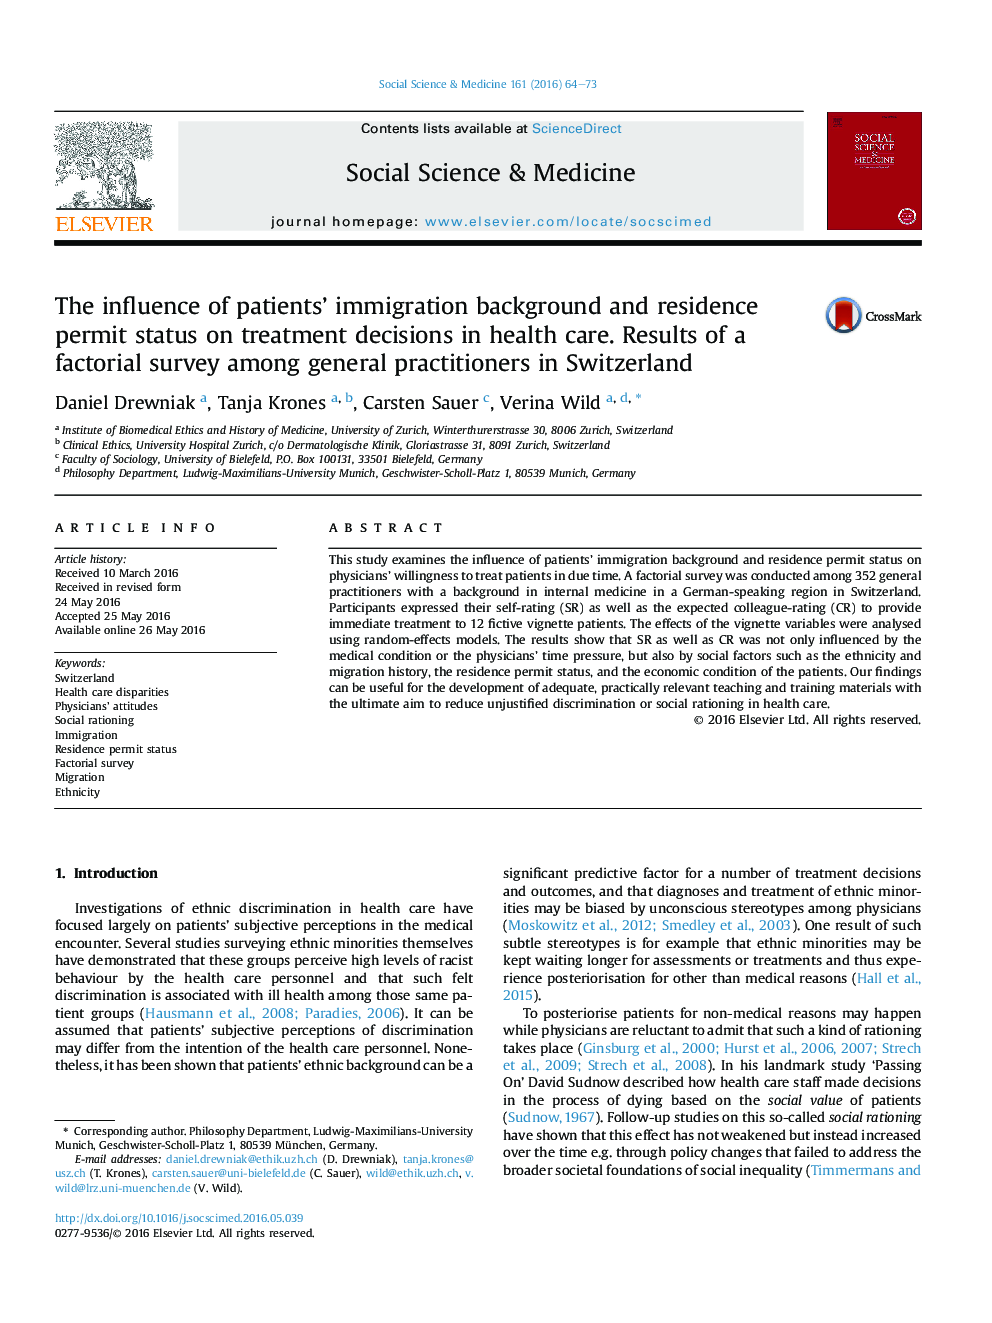 The influence of patients' immigration background and residence permit status on treatment decisions in health care. Results of a factorial survey among general practitioners in Switzerland